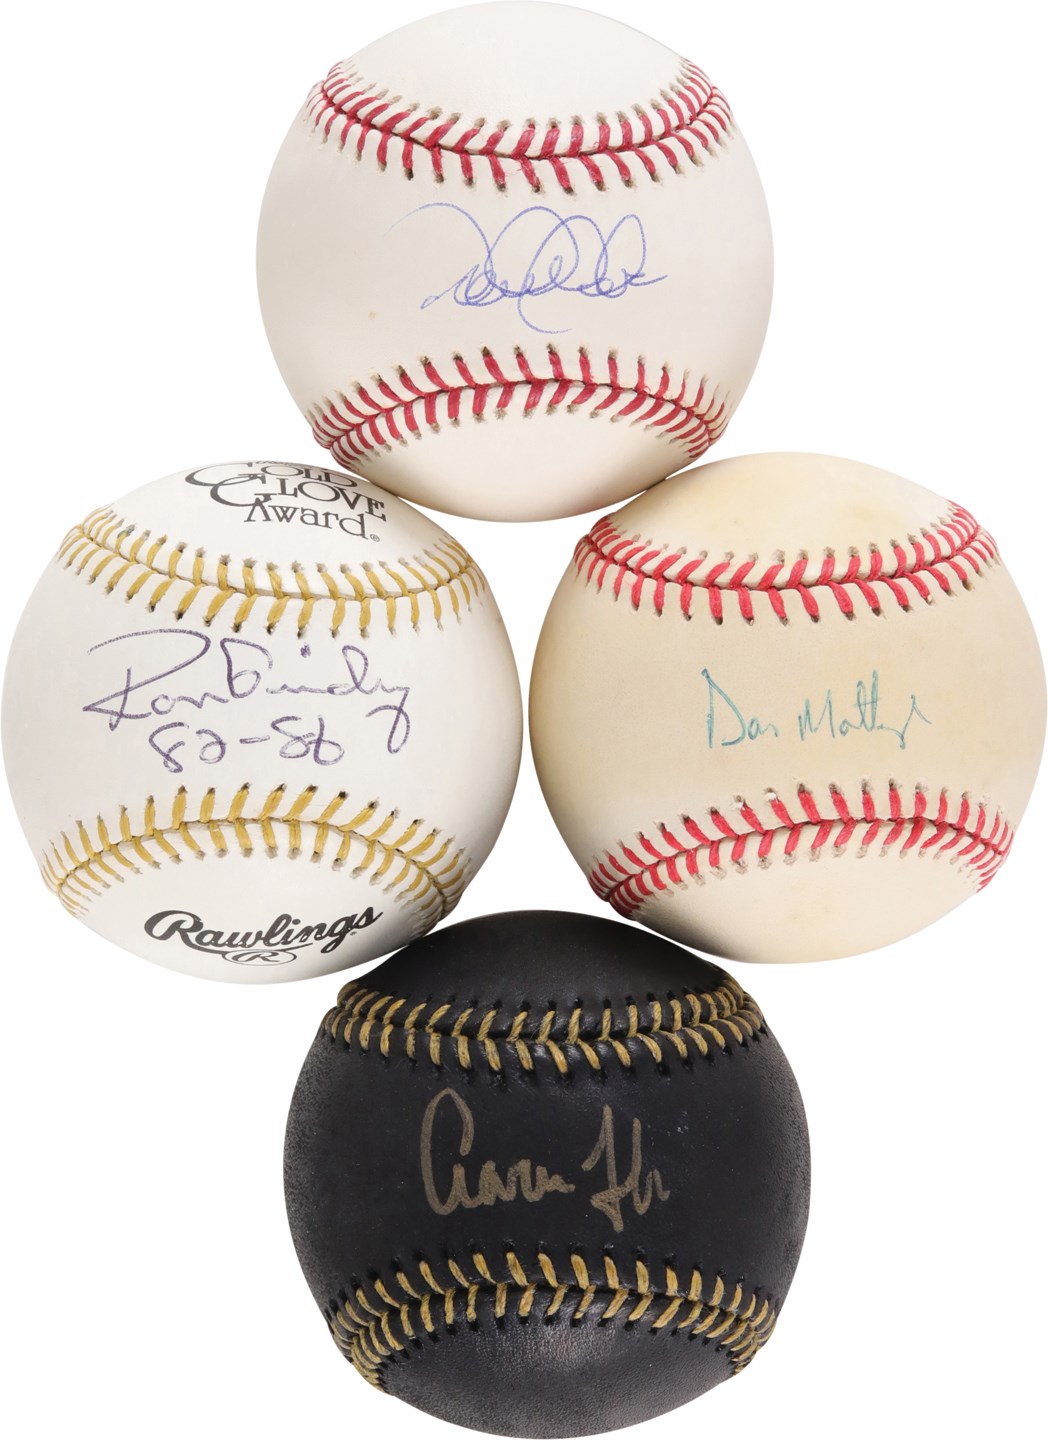 Baseball Autographs - New York Yankees Captains Single-Signed Baseball Collection - Jeter, Judge, Guidry, and Mattingly (4)